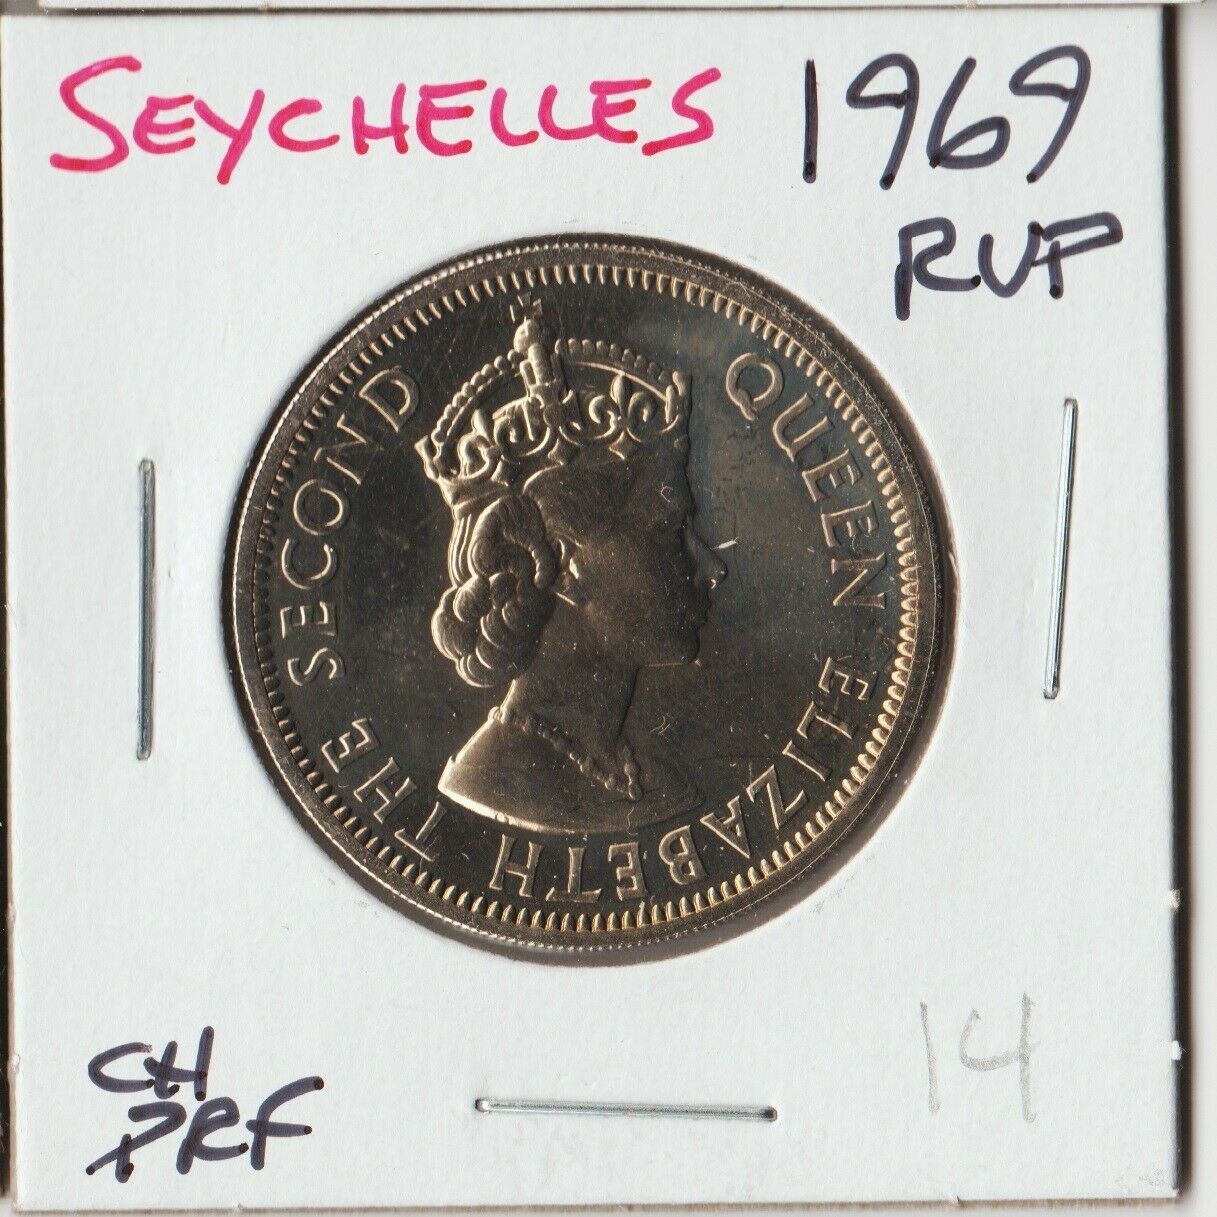 SEYCHELLES 1969 | RUPEE | COIN IN PROOF